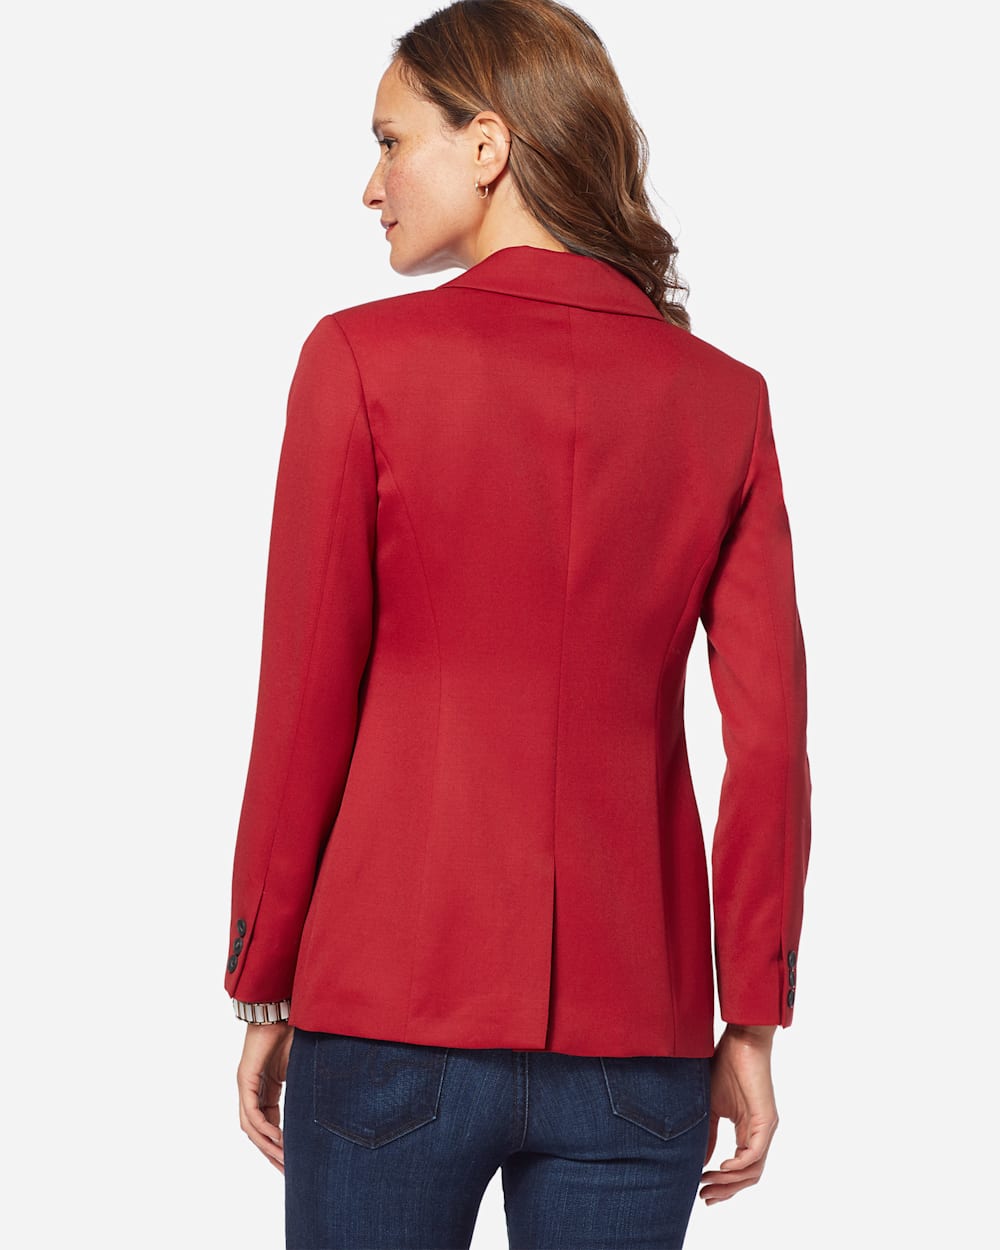 ADDITIONAL VIEW OF WOMEN'S SEASONLESS WOOL BLAZER IN RED ROCK image number 3